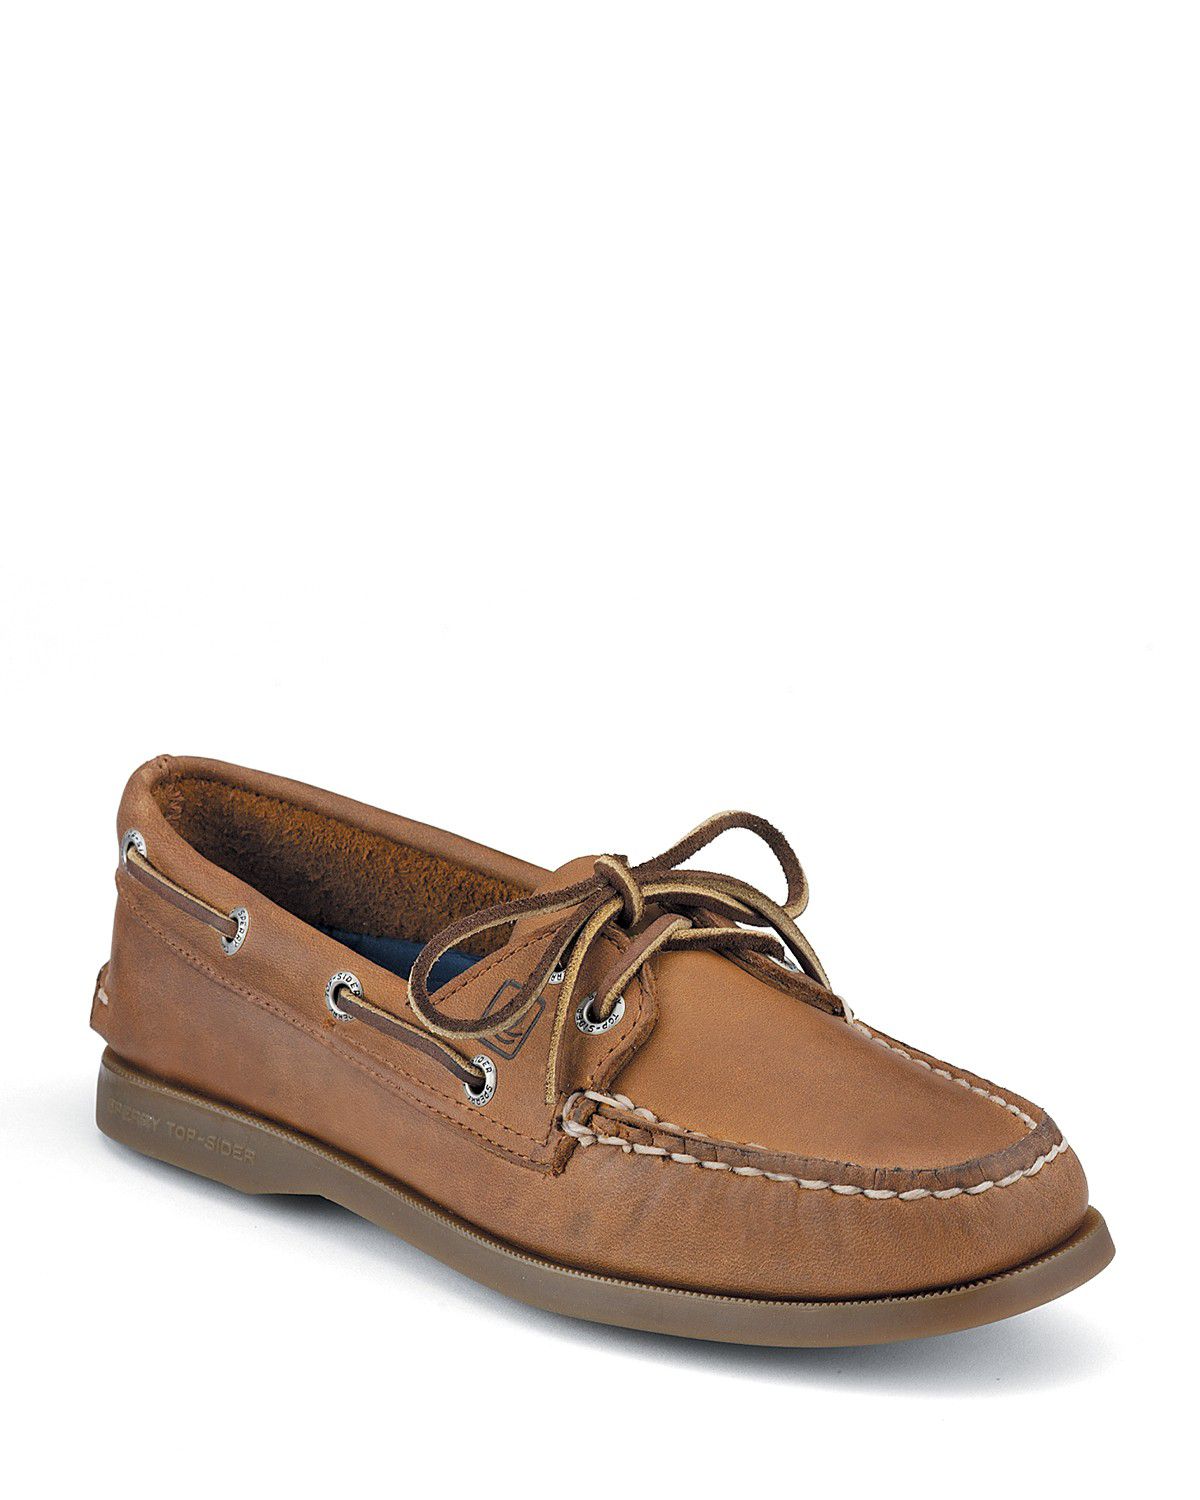 Sperry top-sider 